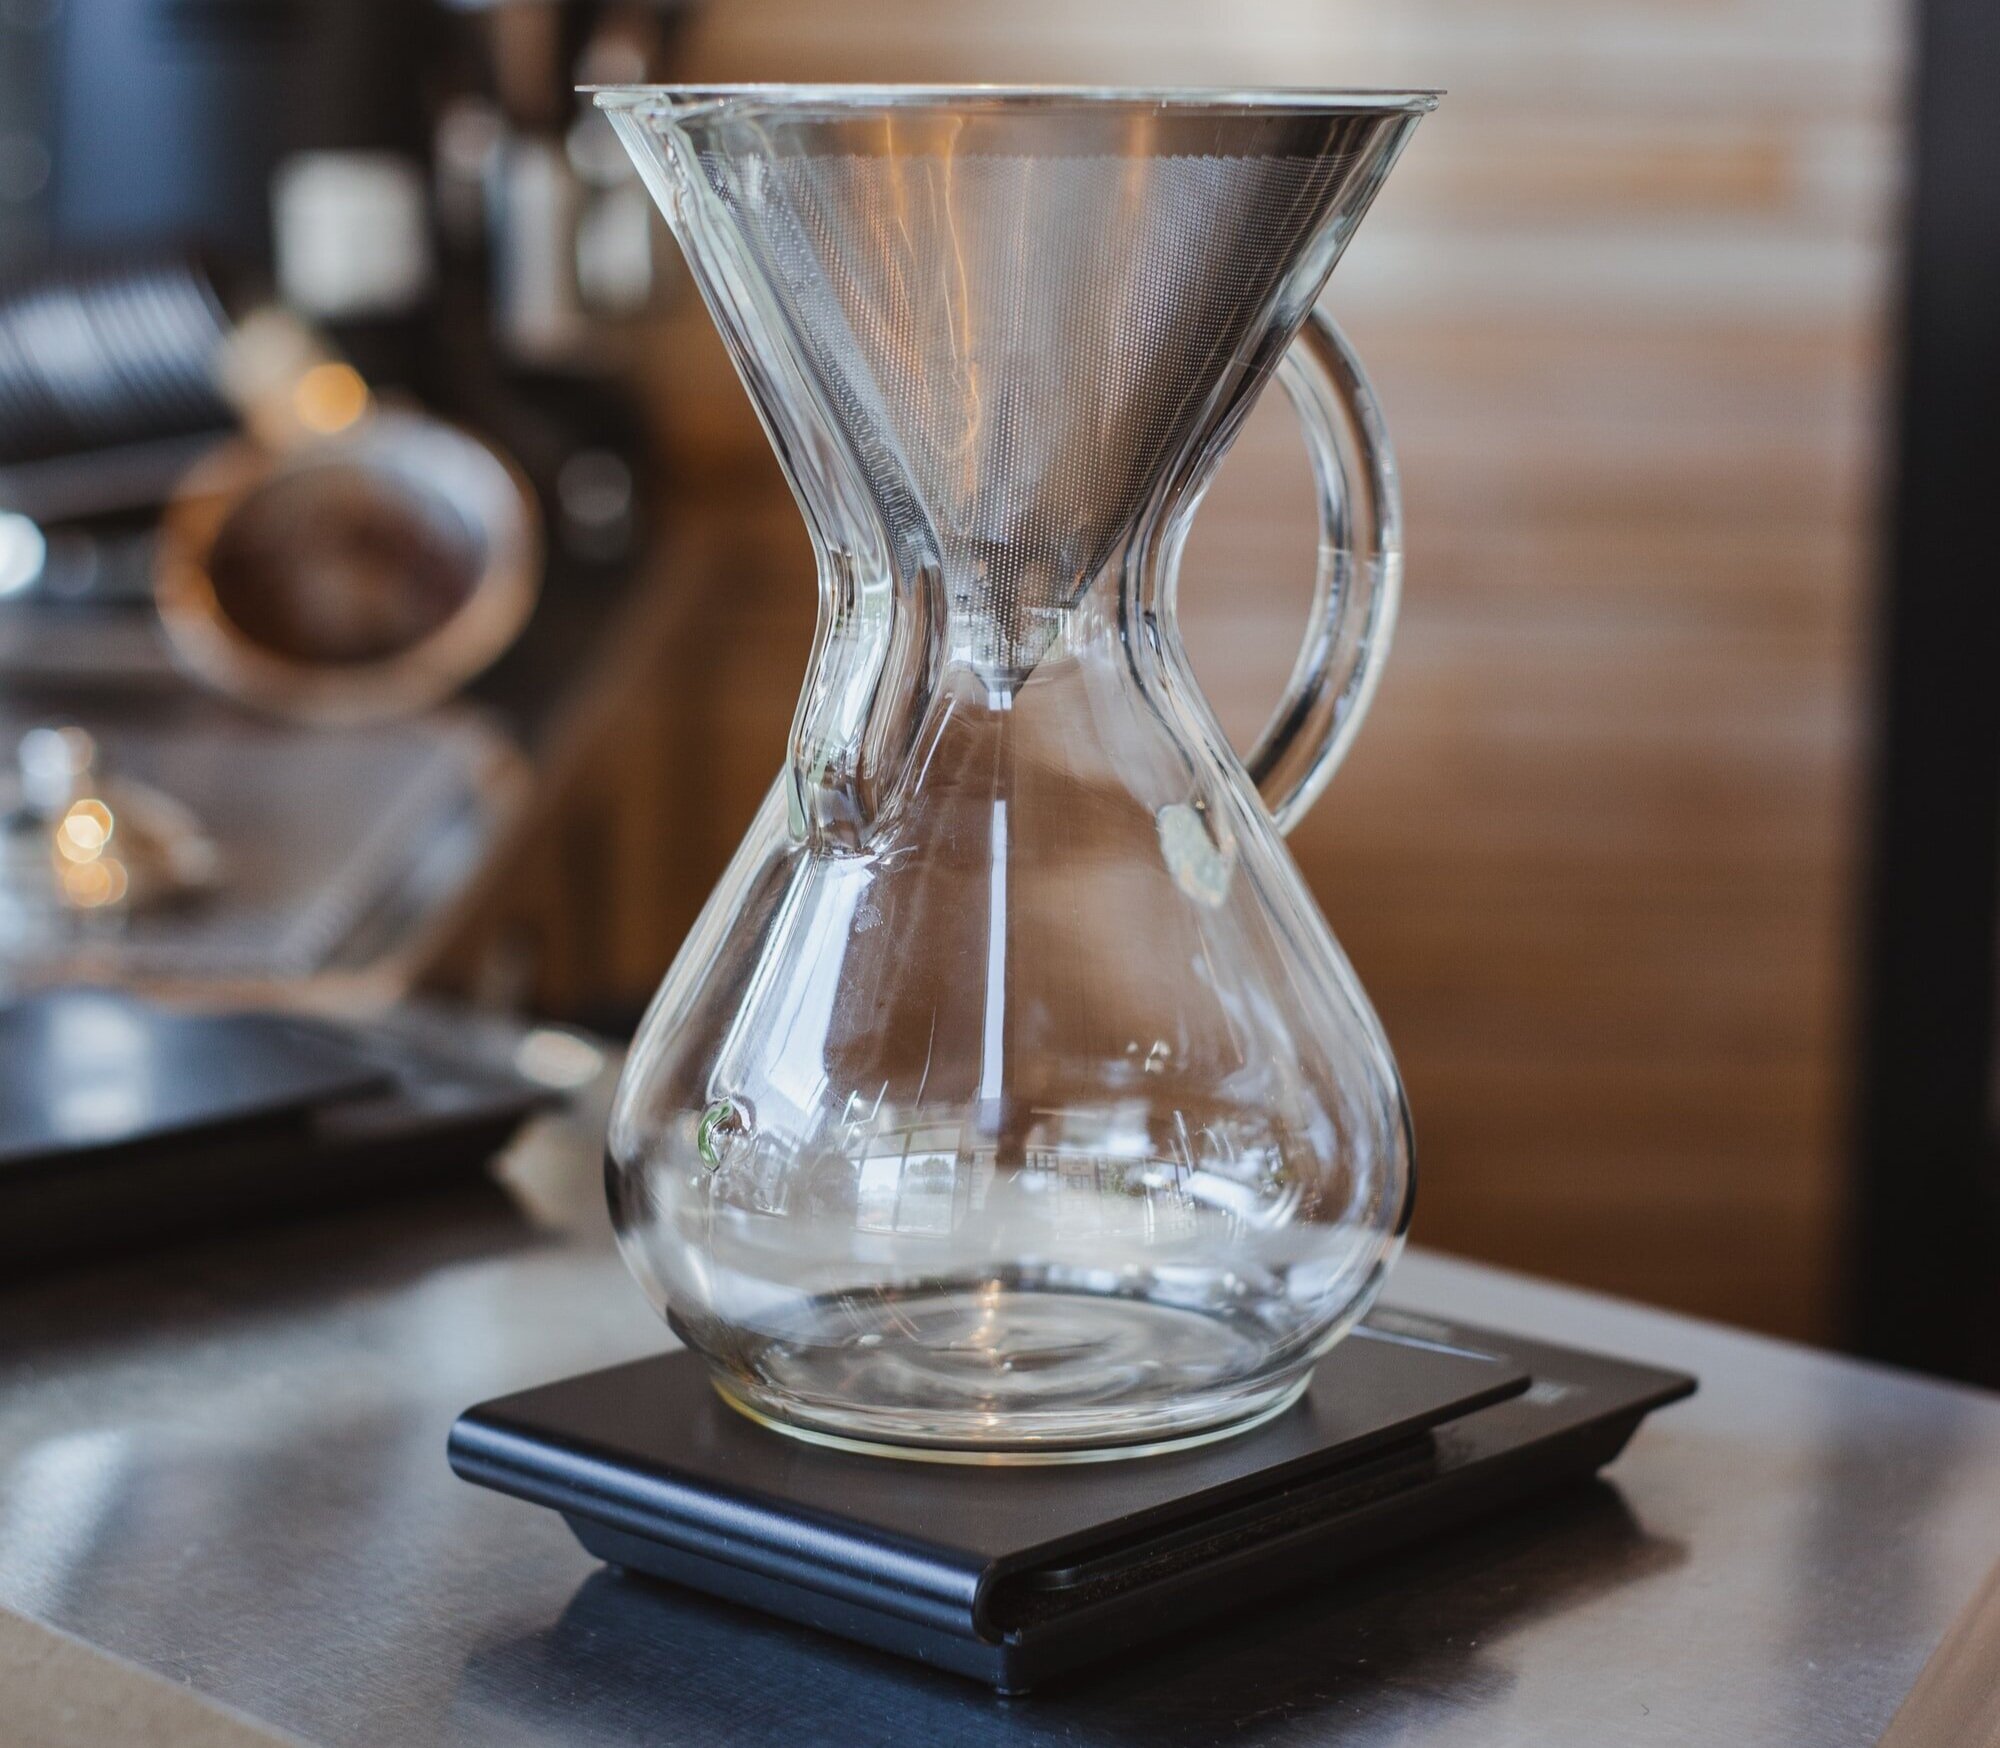 Barista scale: Which one to choose and how to use it afterwards